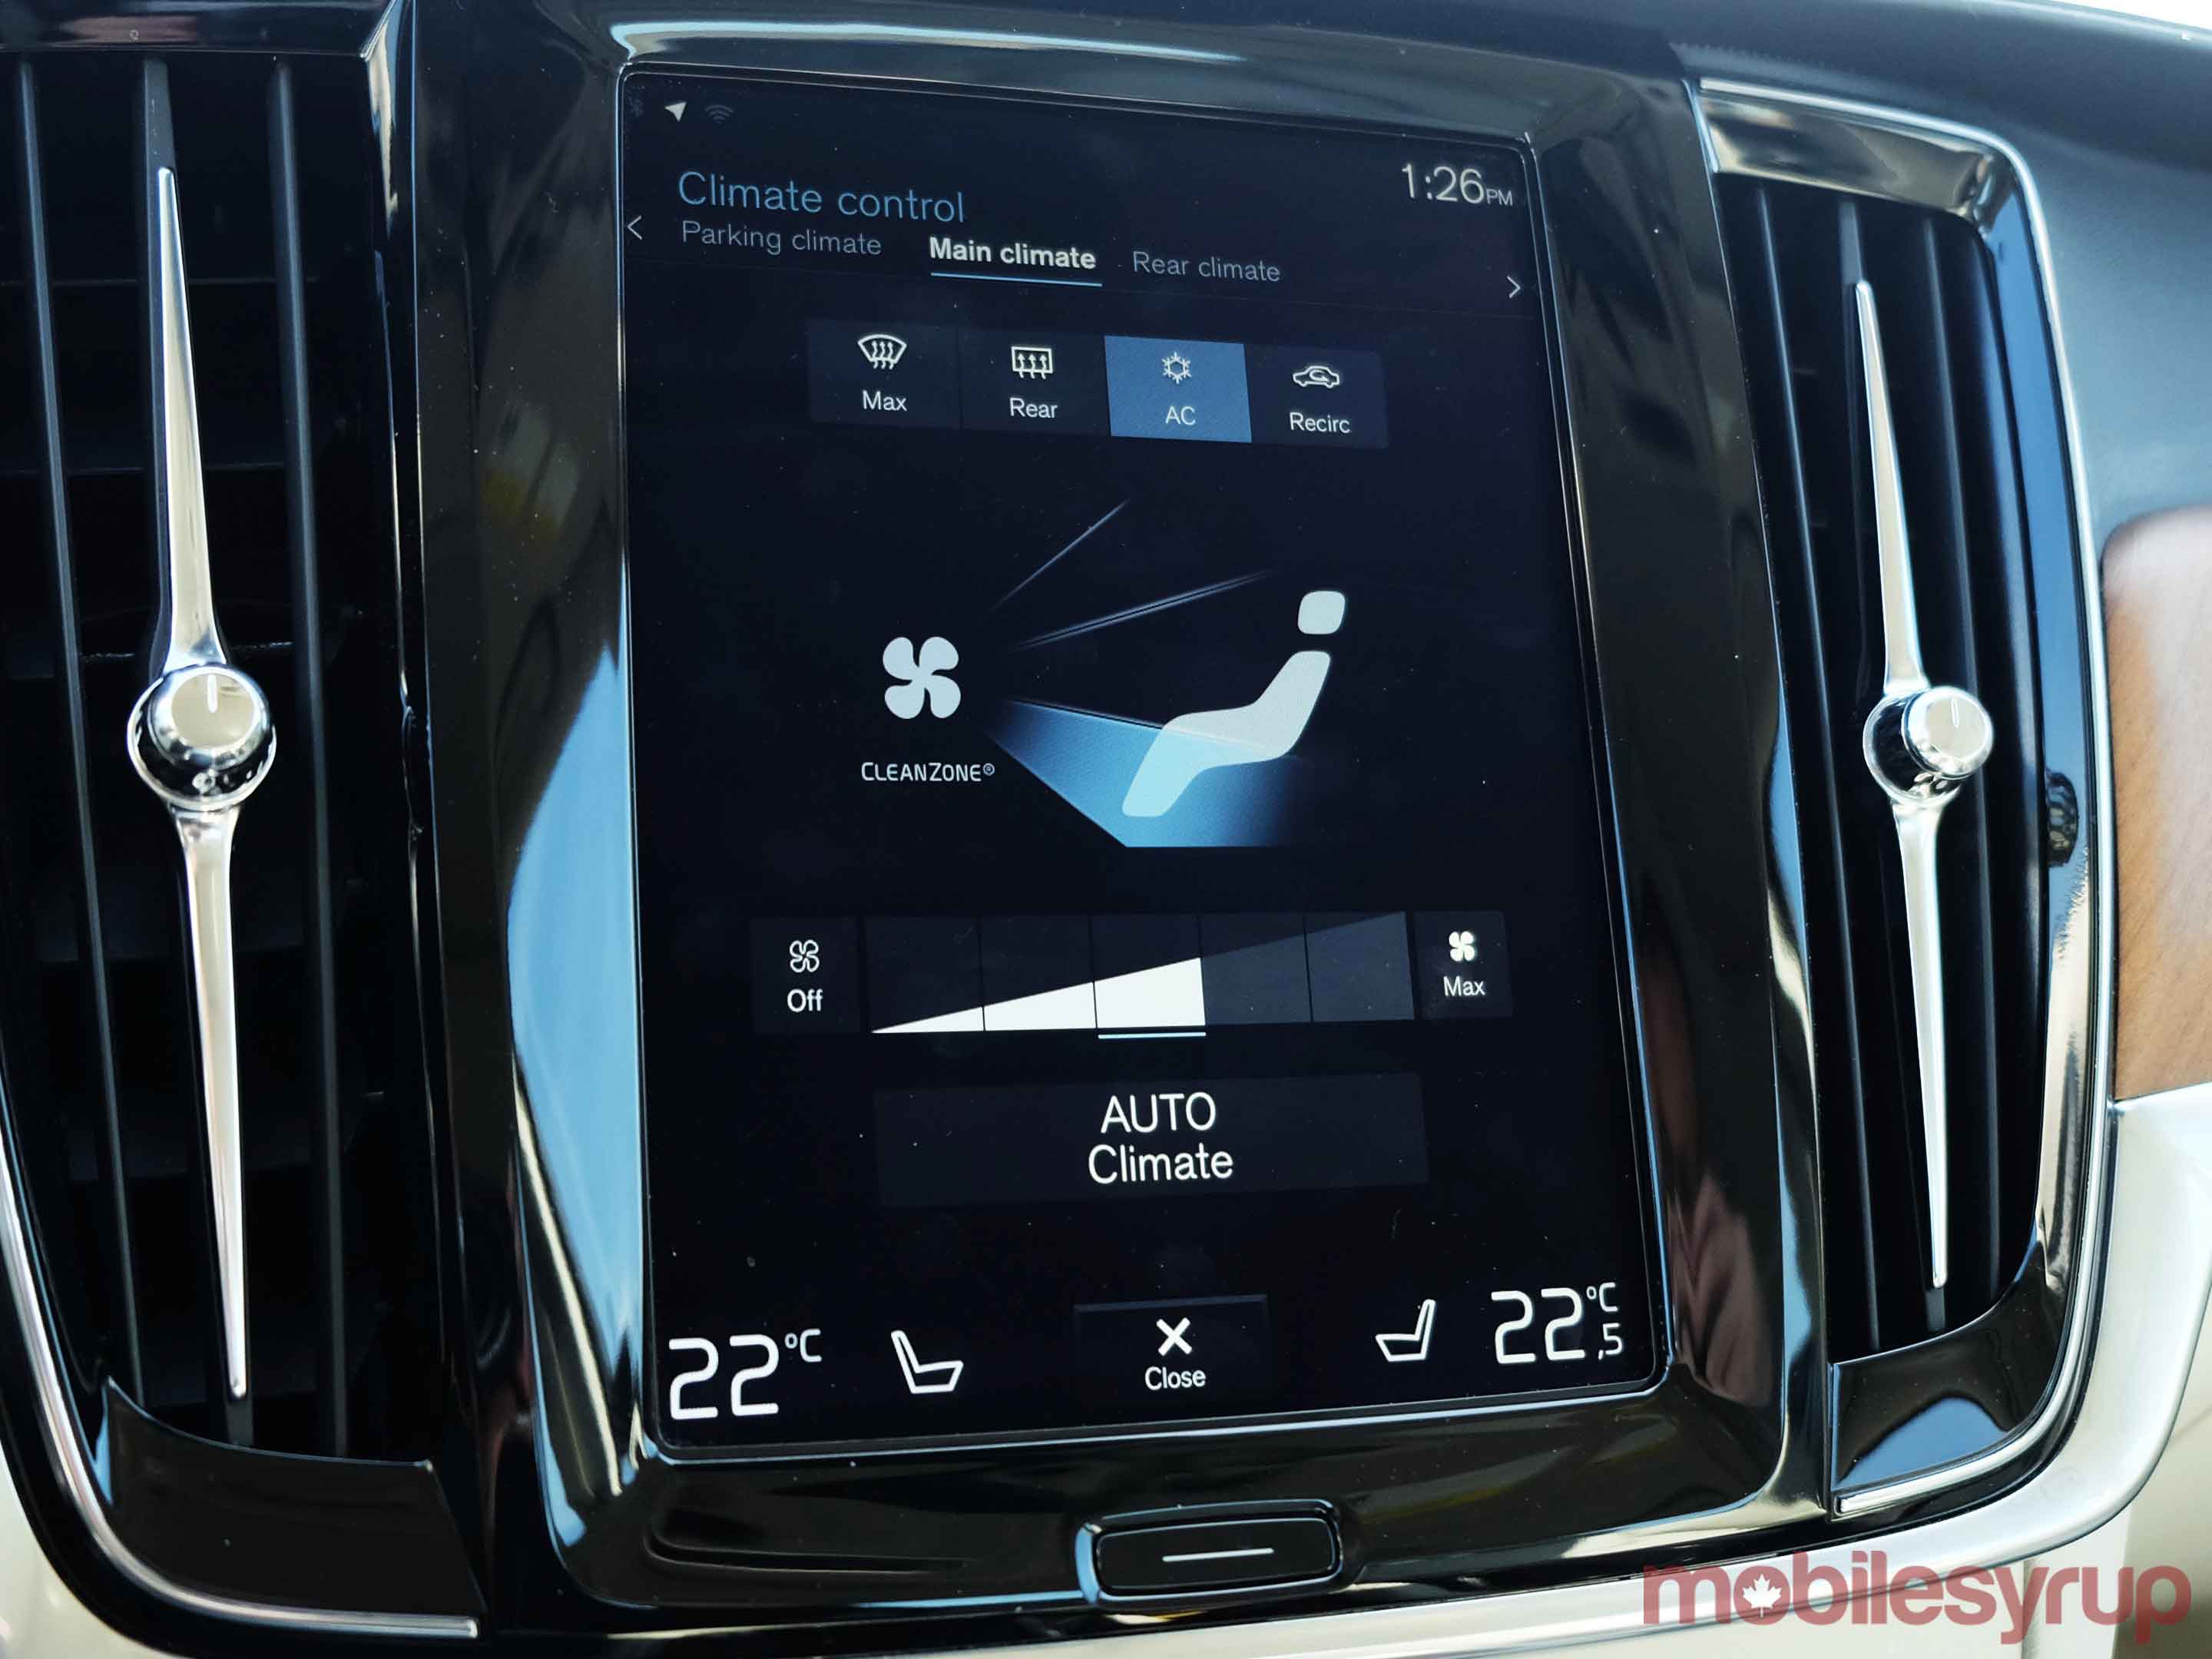 Volve S90 climate control